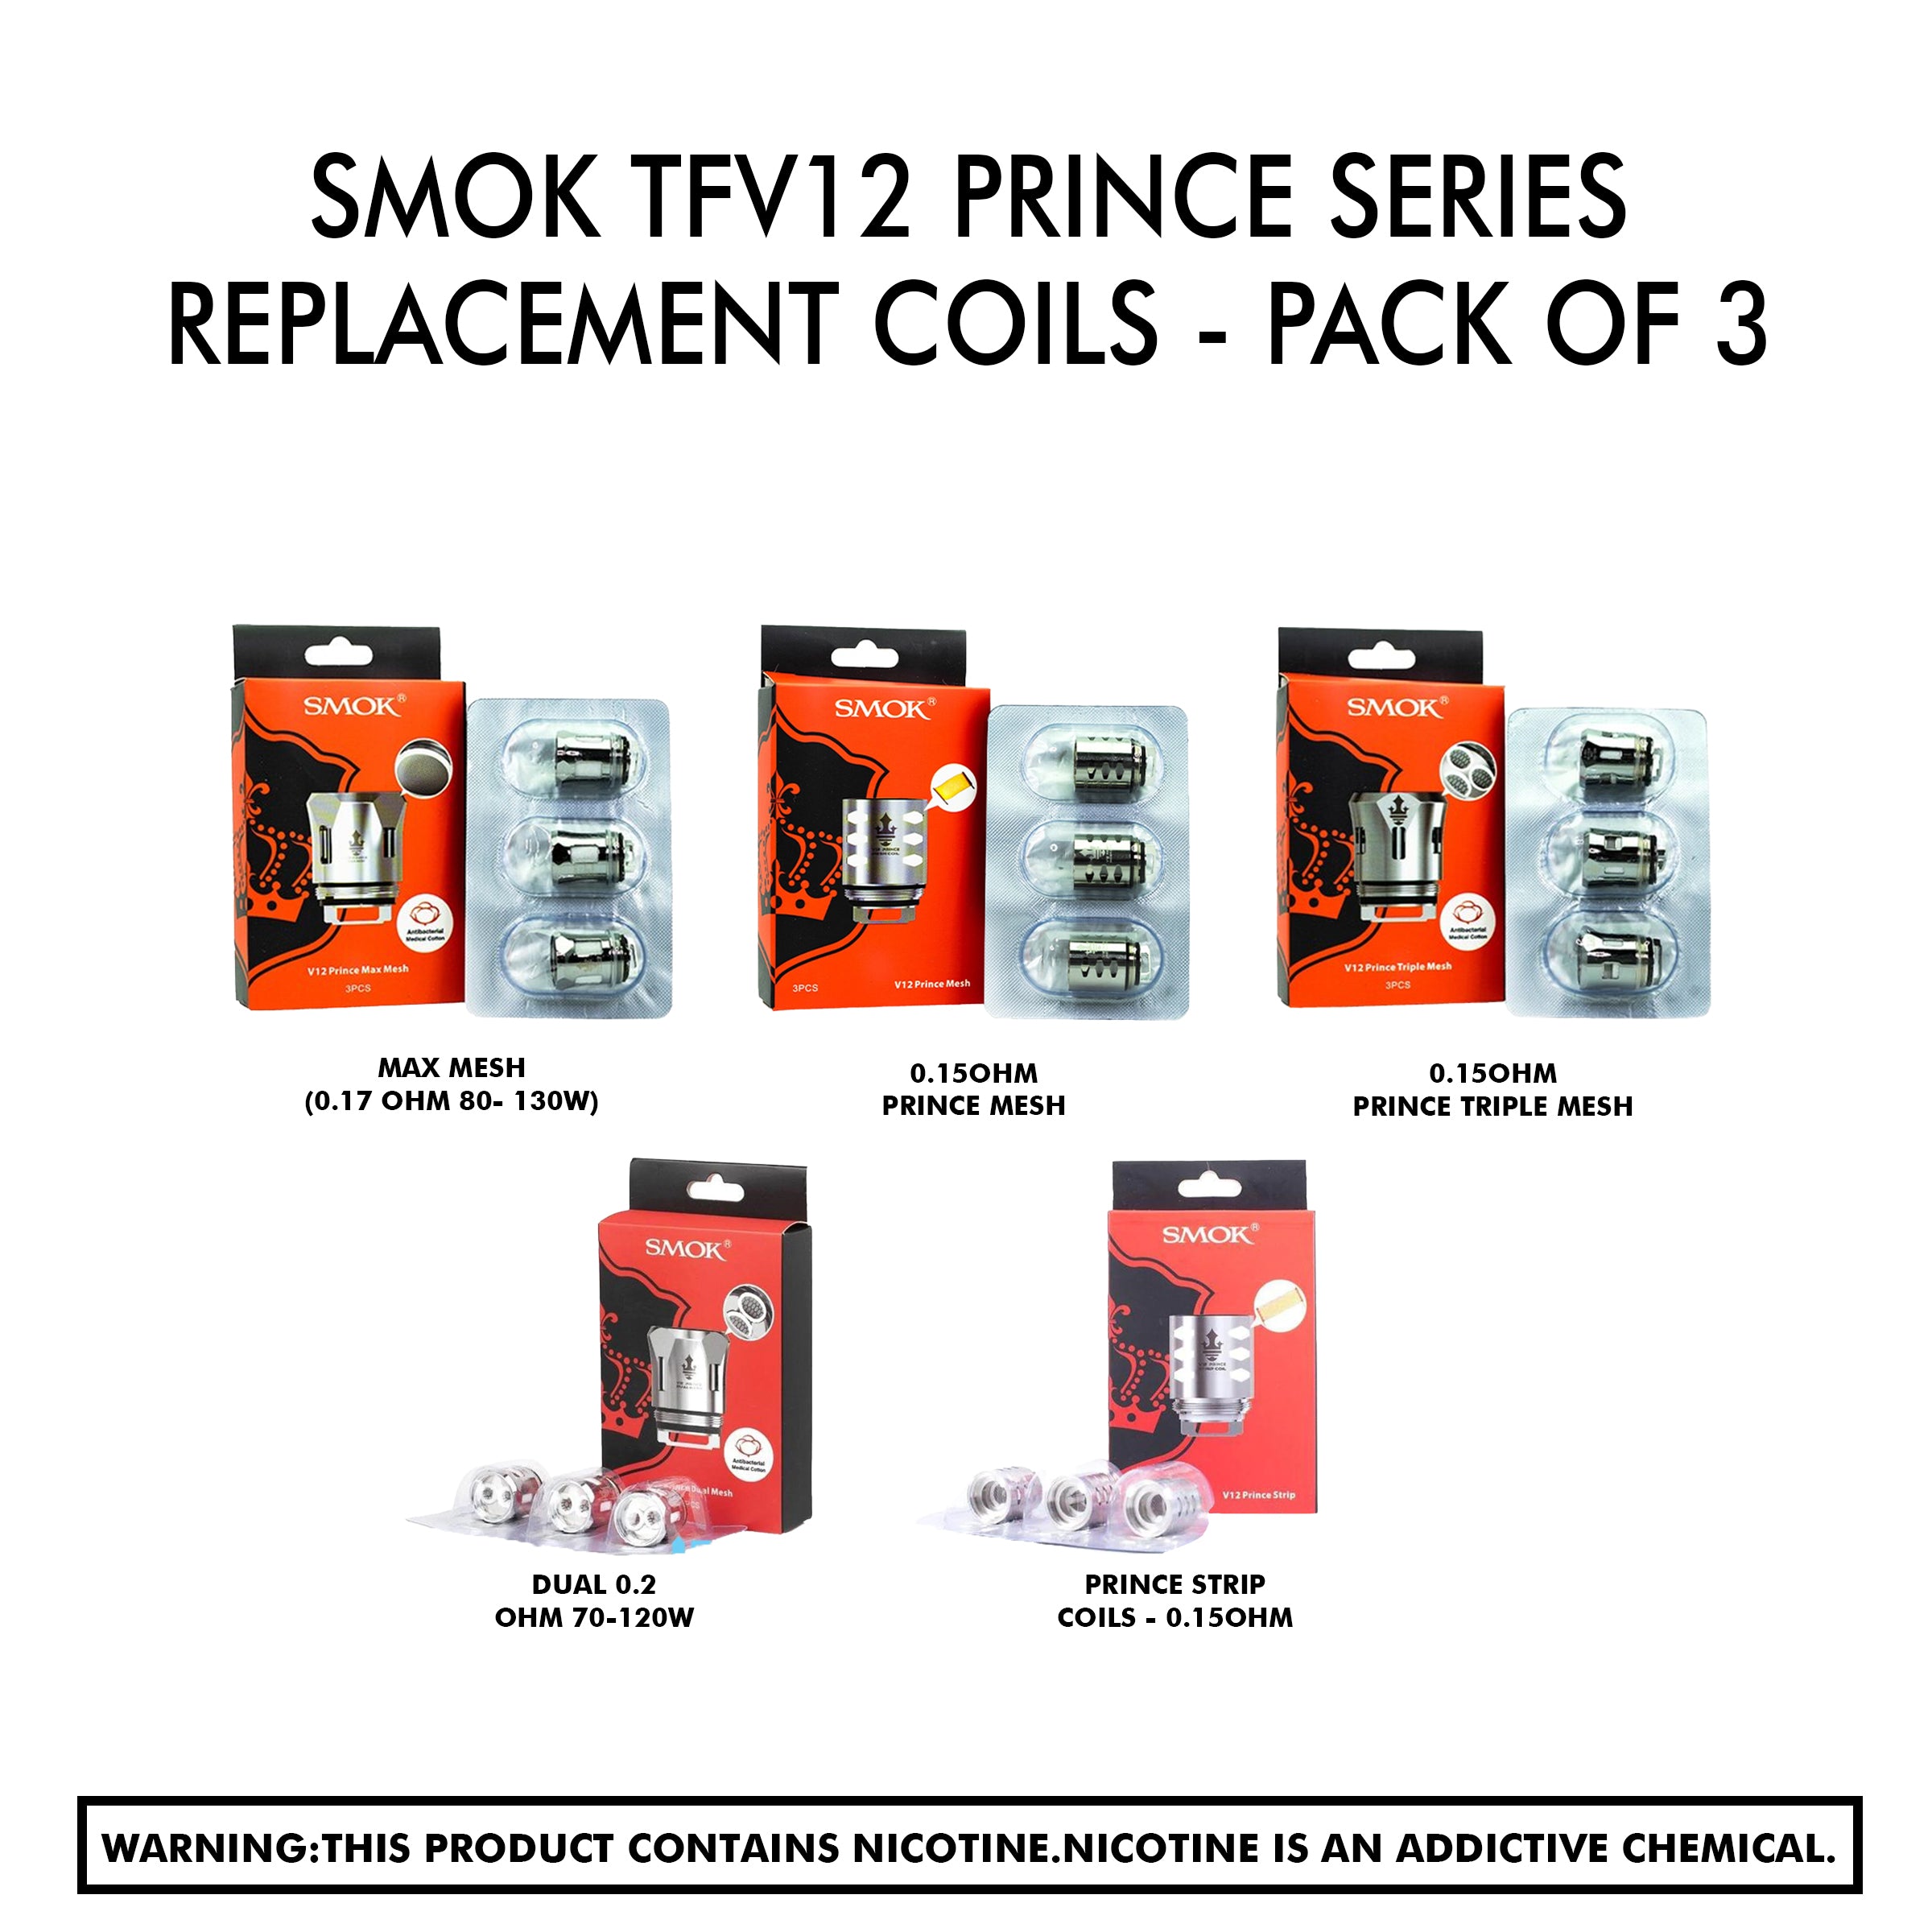 Smok Tfv12 Prince Series Replacement Coils - Pack Of 3